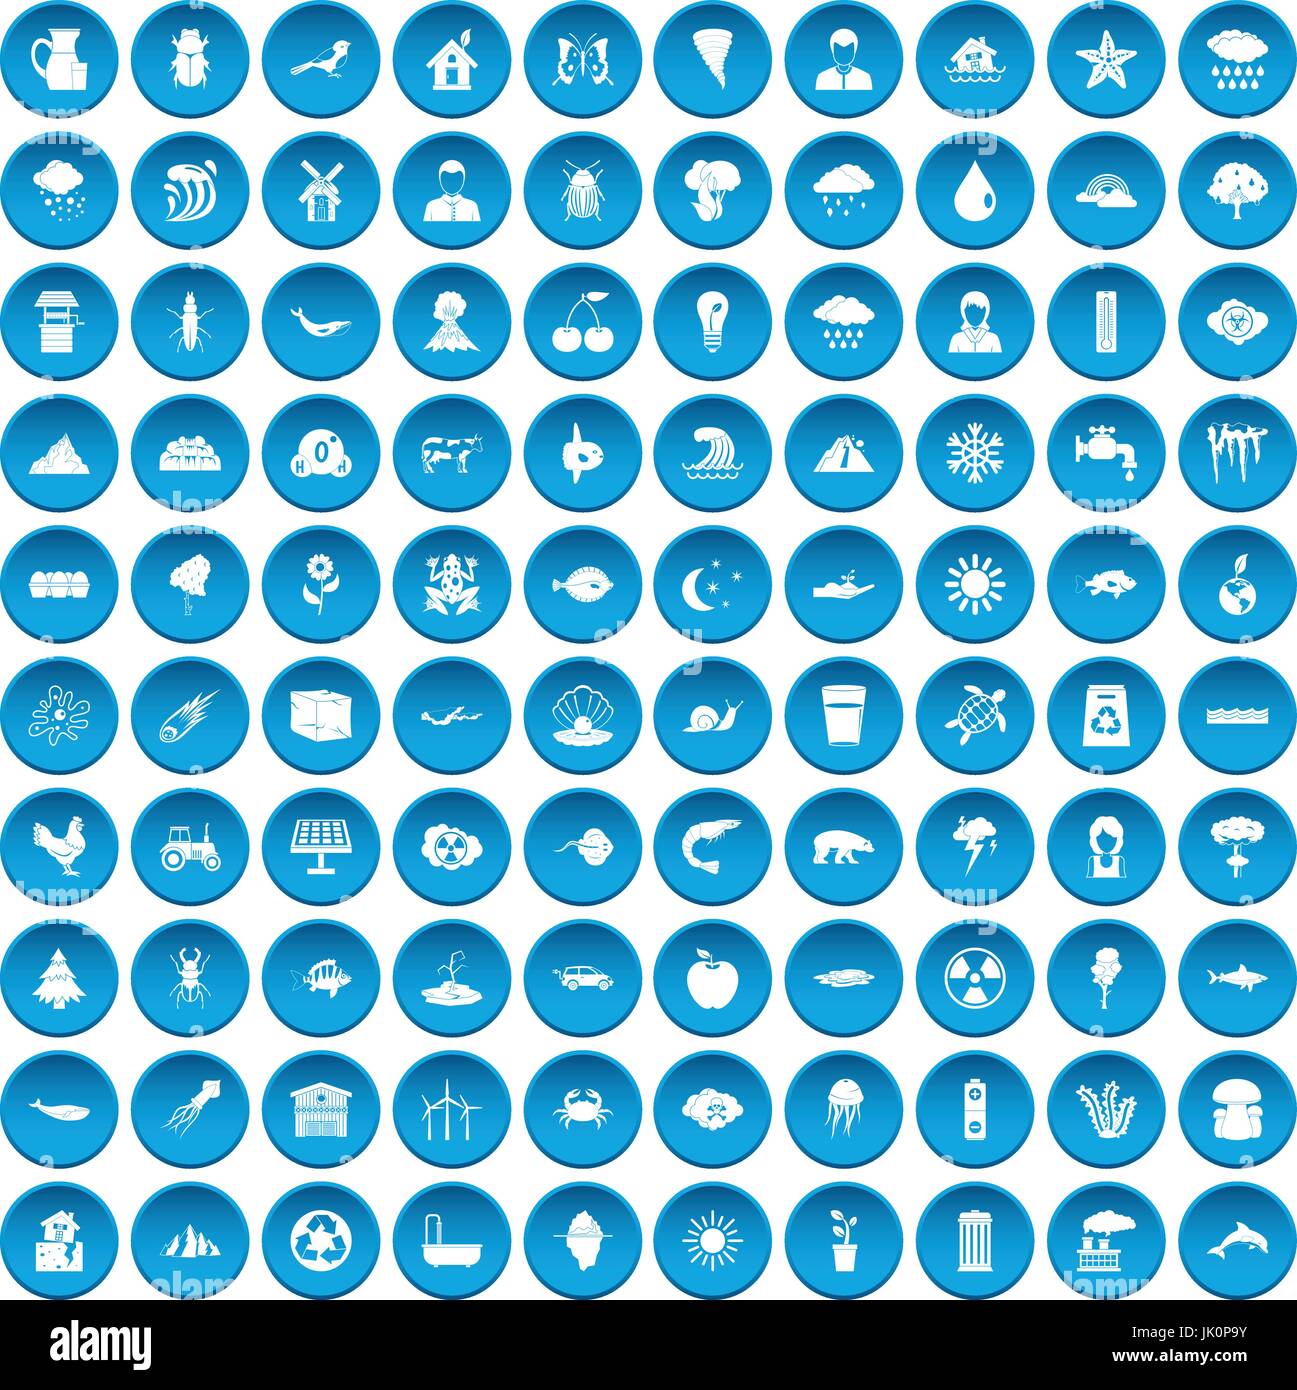 100 earth icons set blue Stock Vector